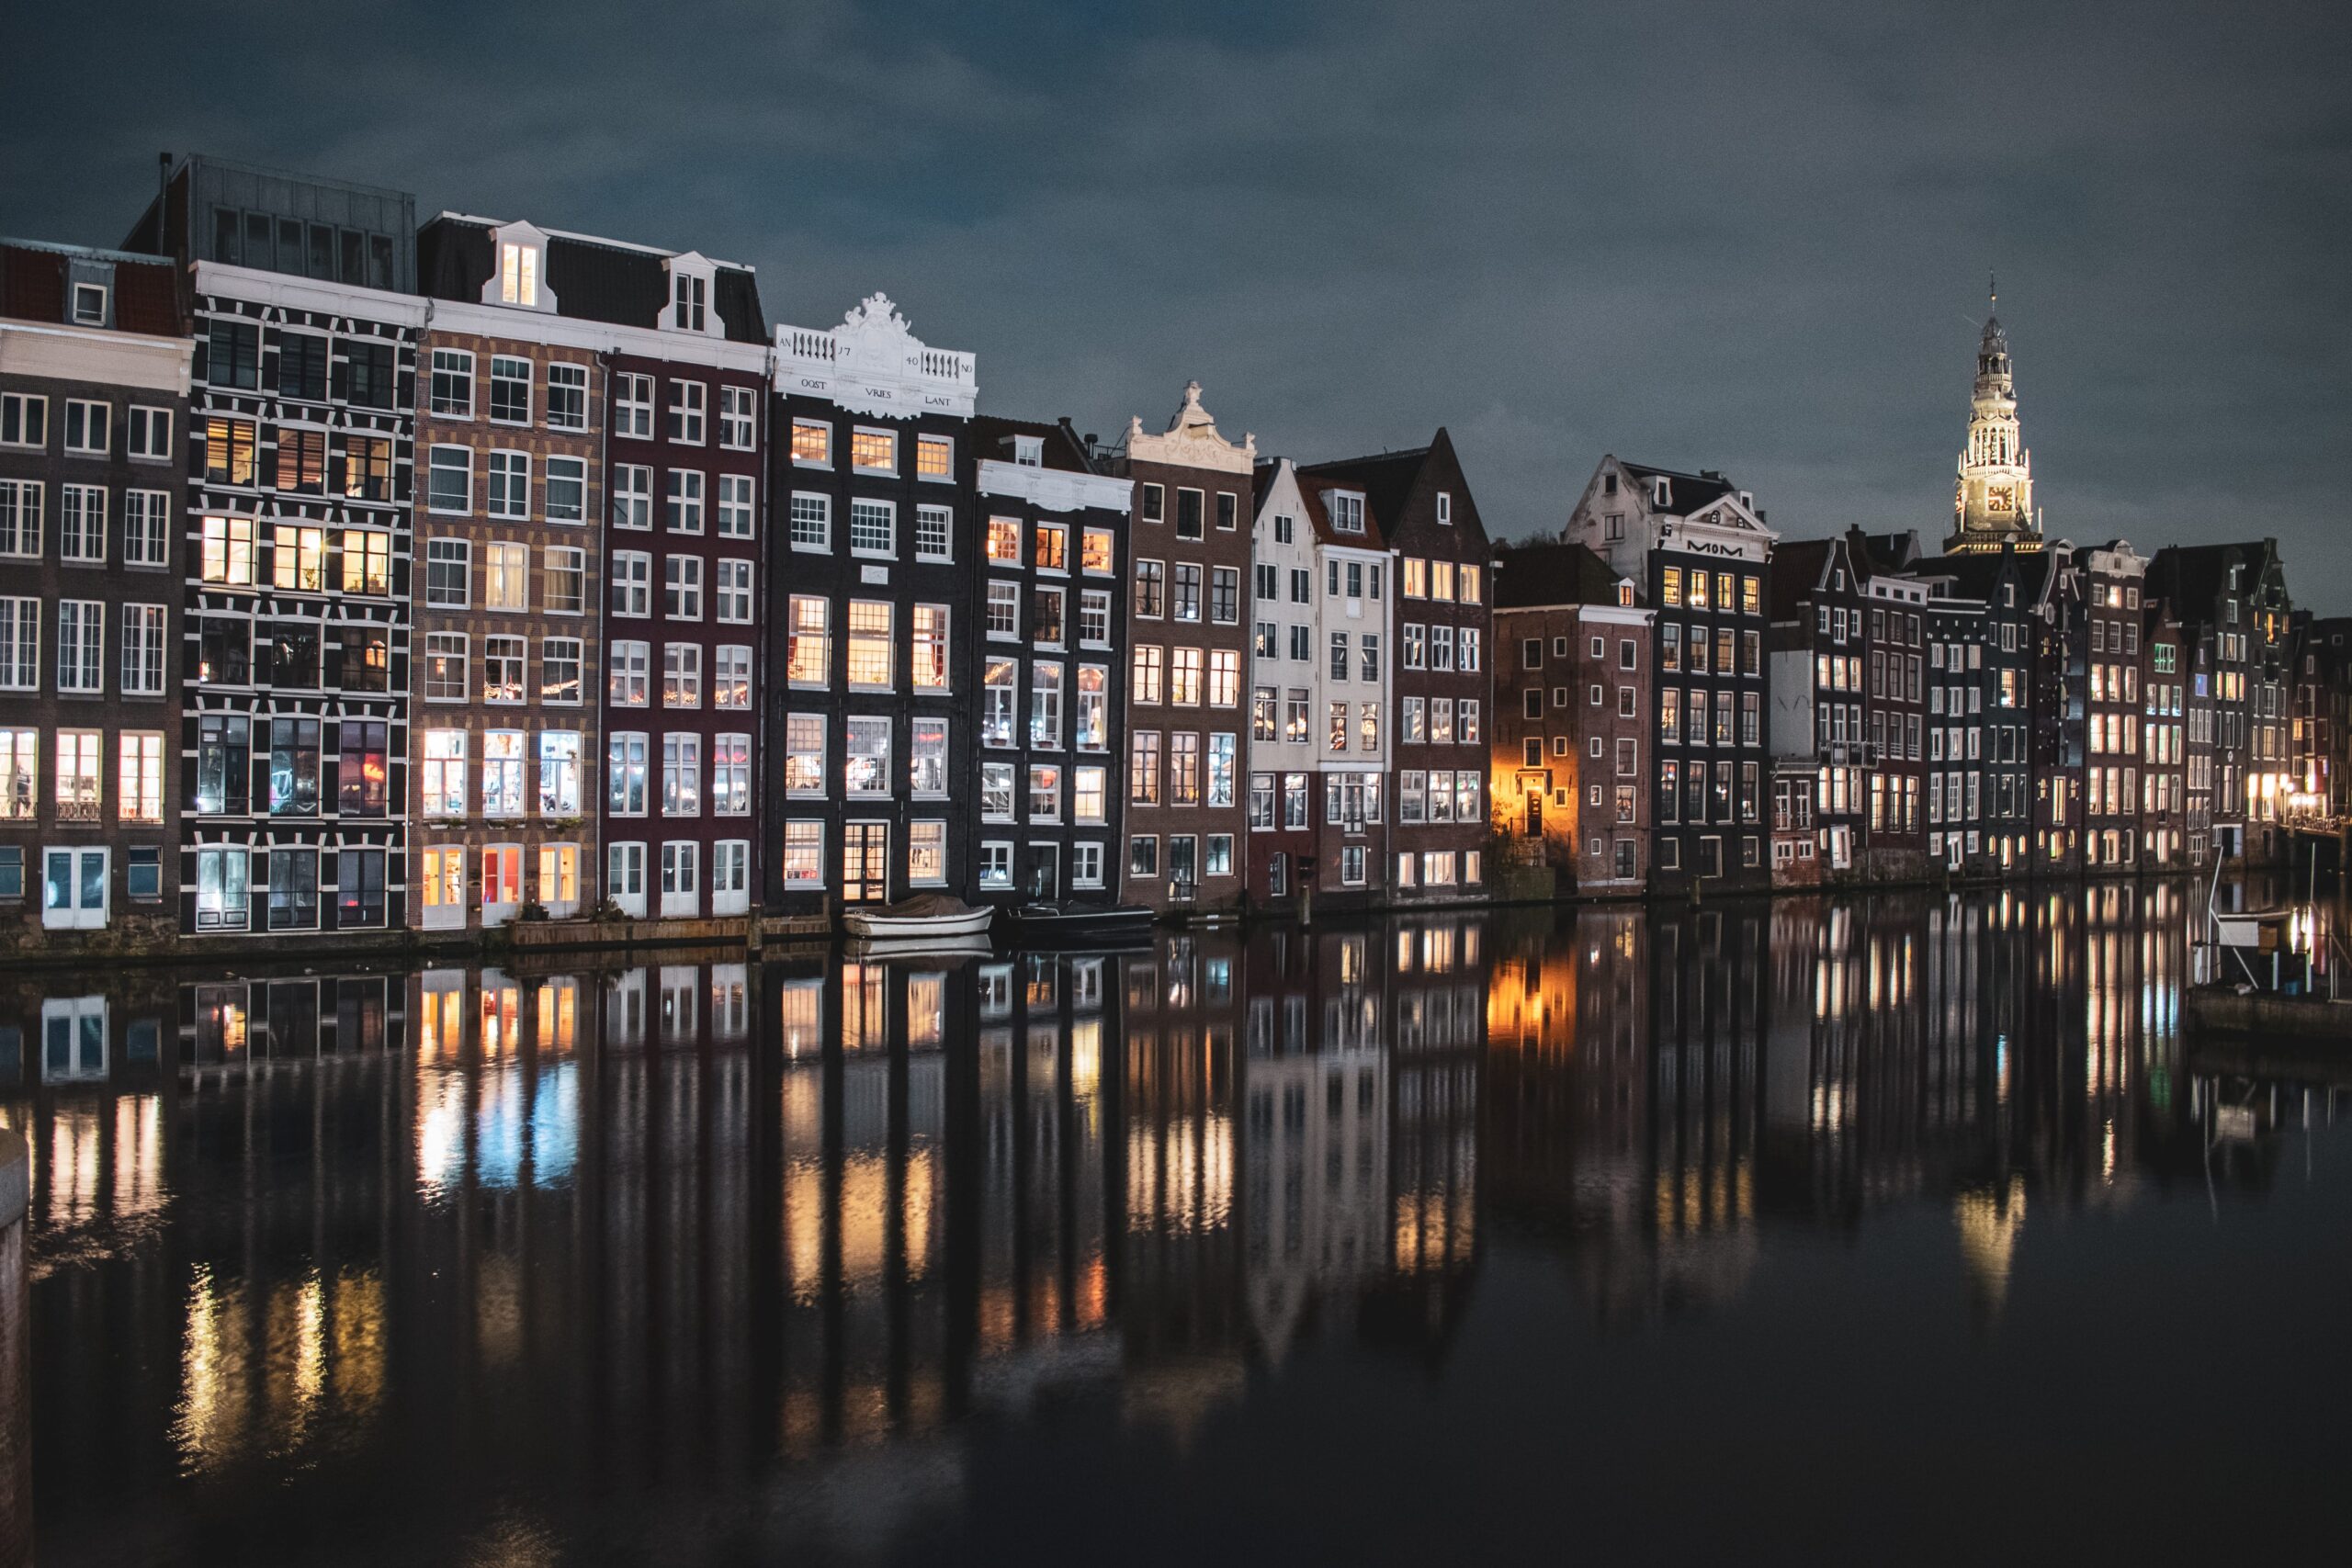 A classic evening sight in Amsterdam